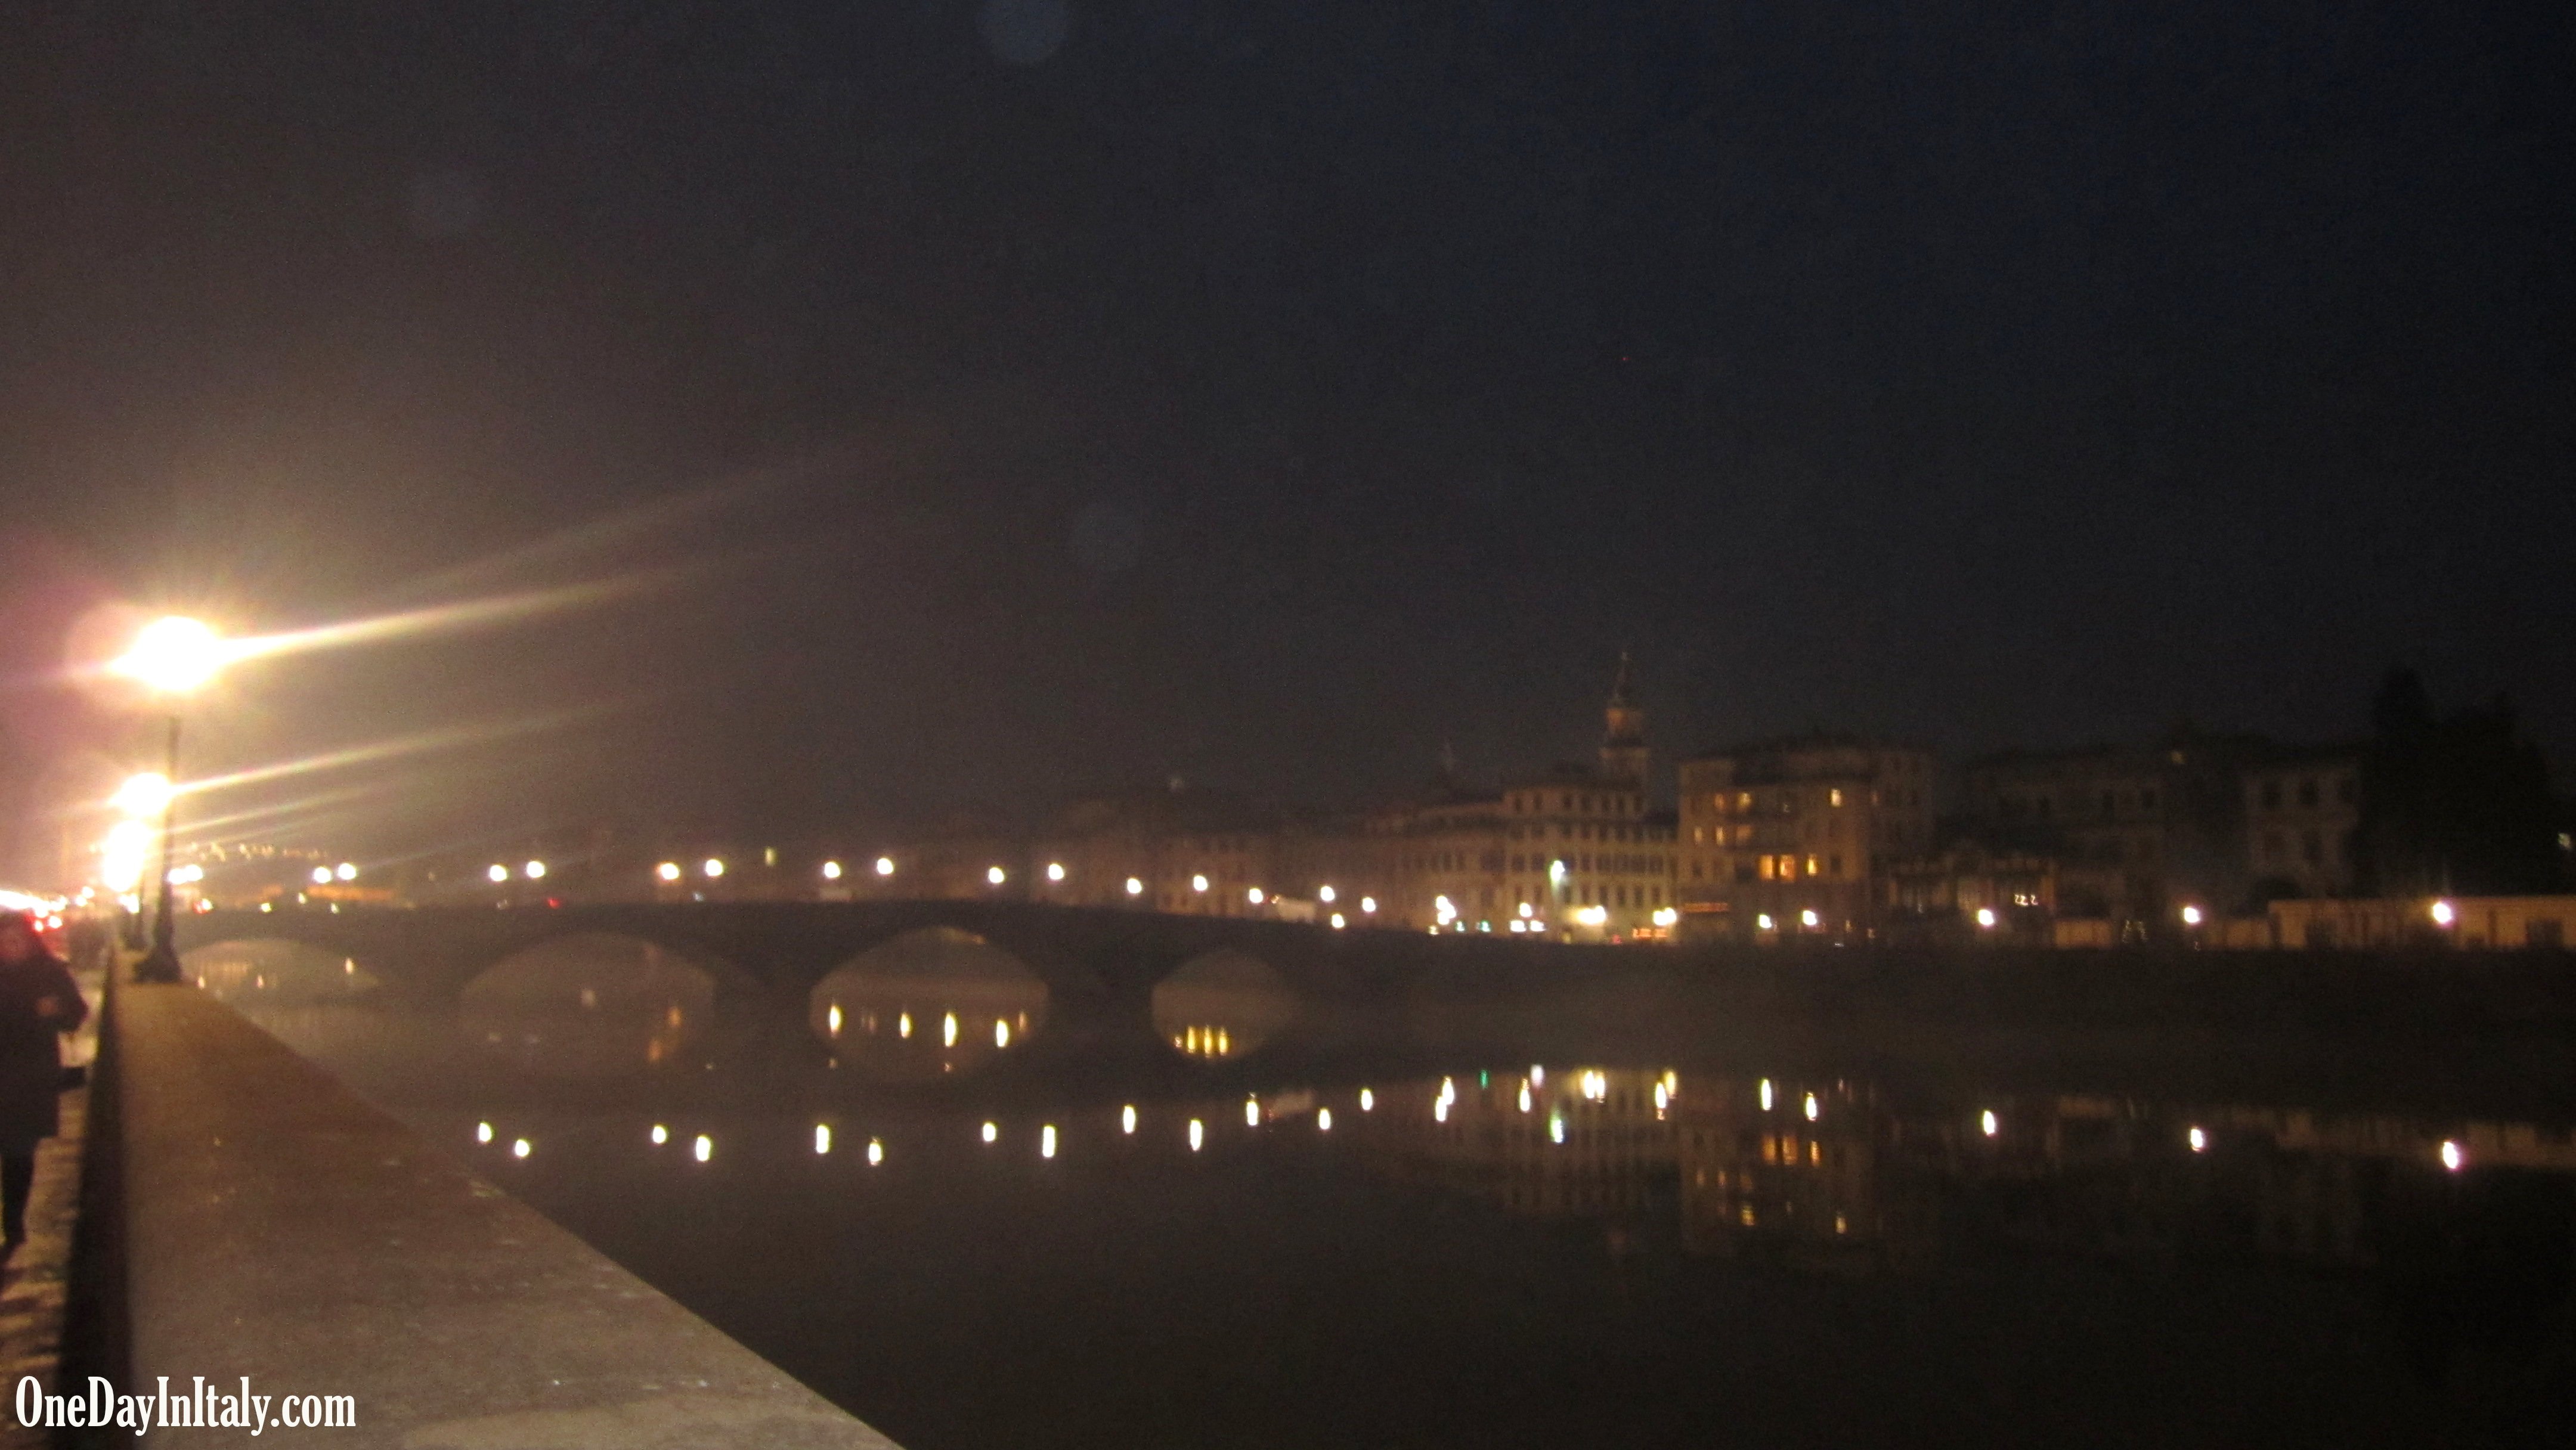 The River Arno, Florence